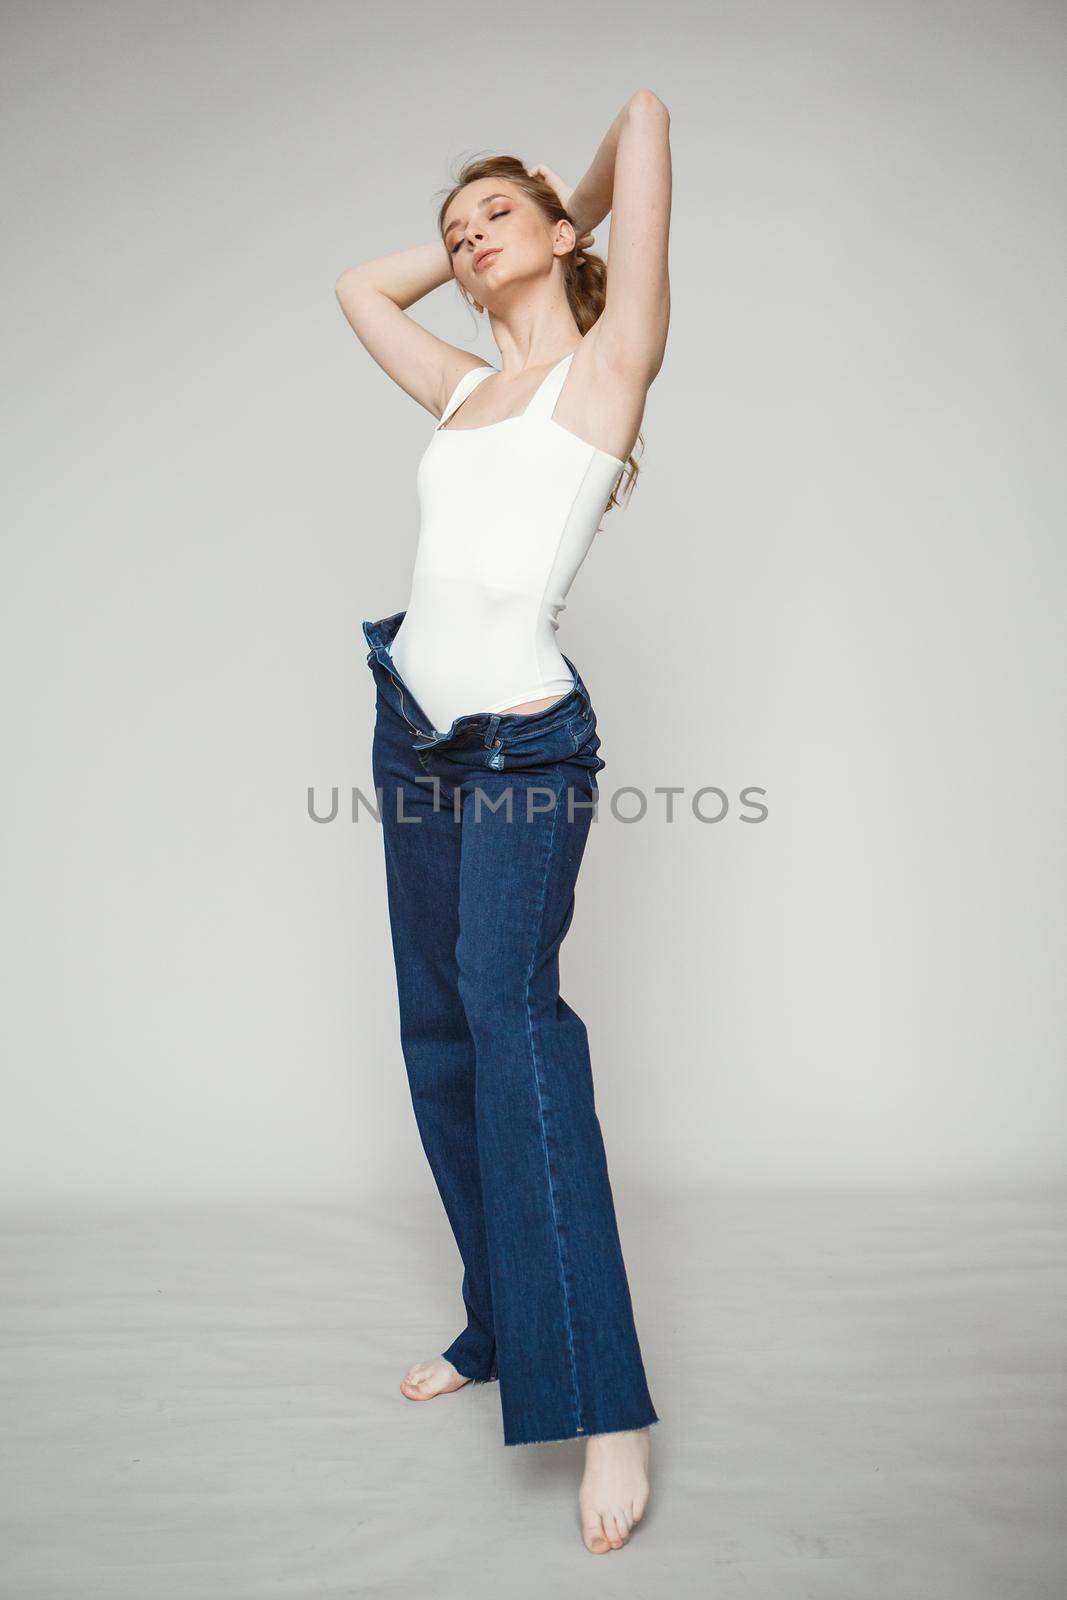 Legs in jeans to beautiful girl. Isolated on background